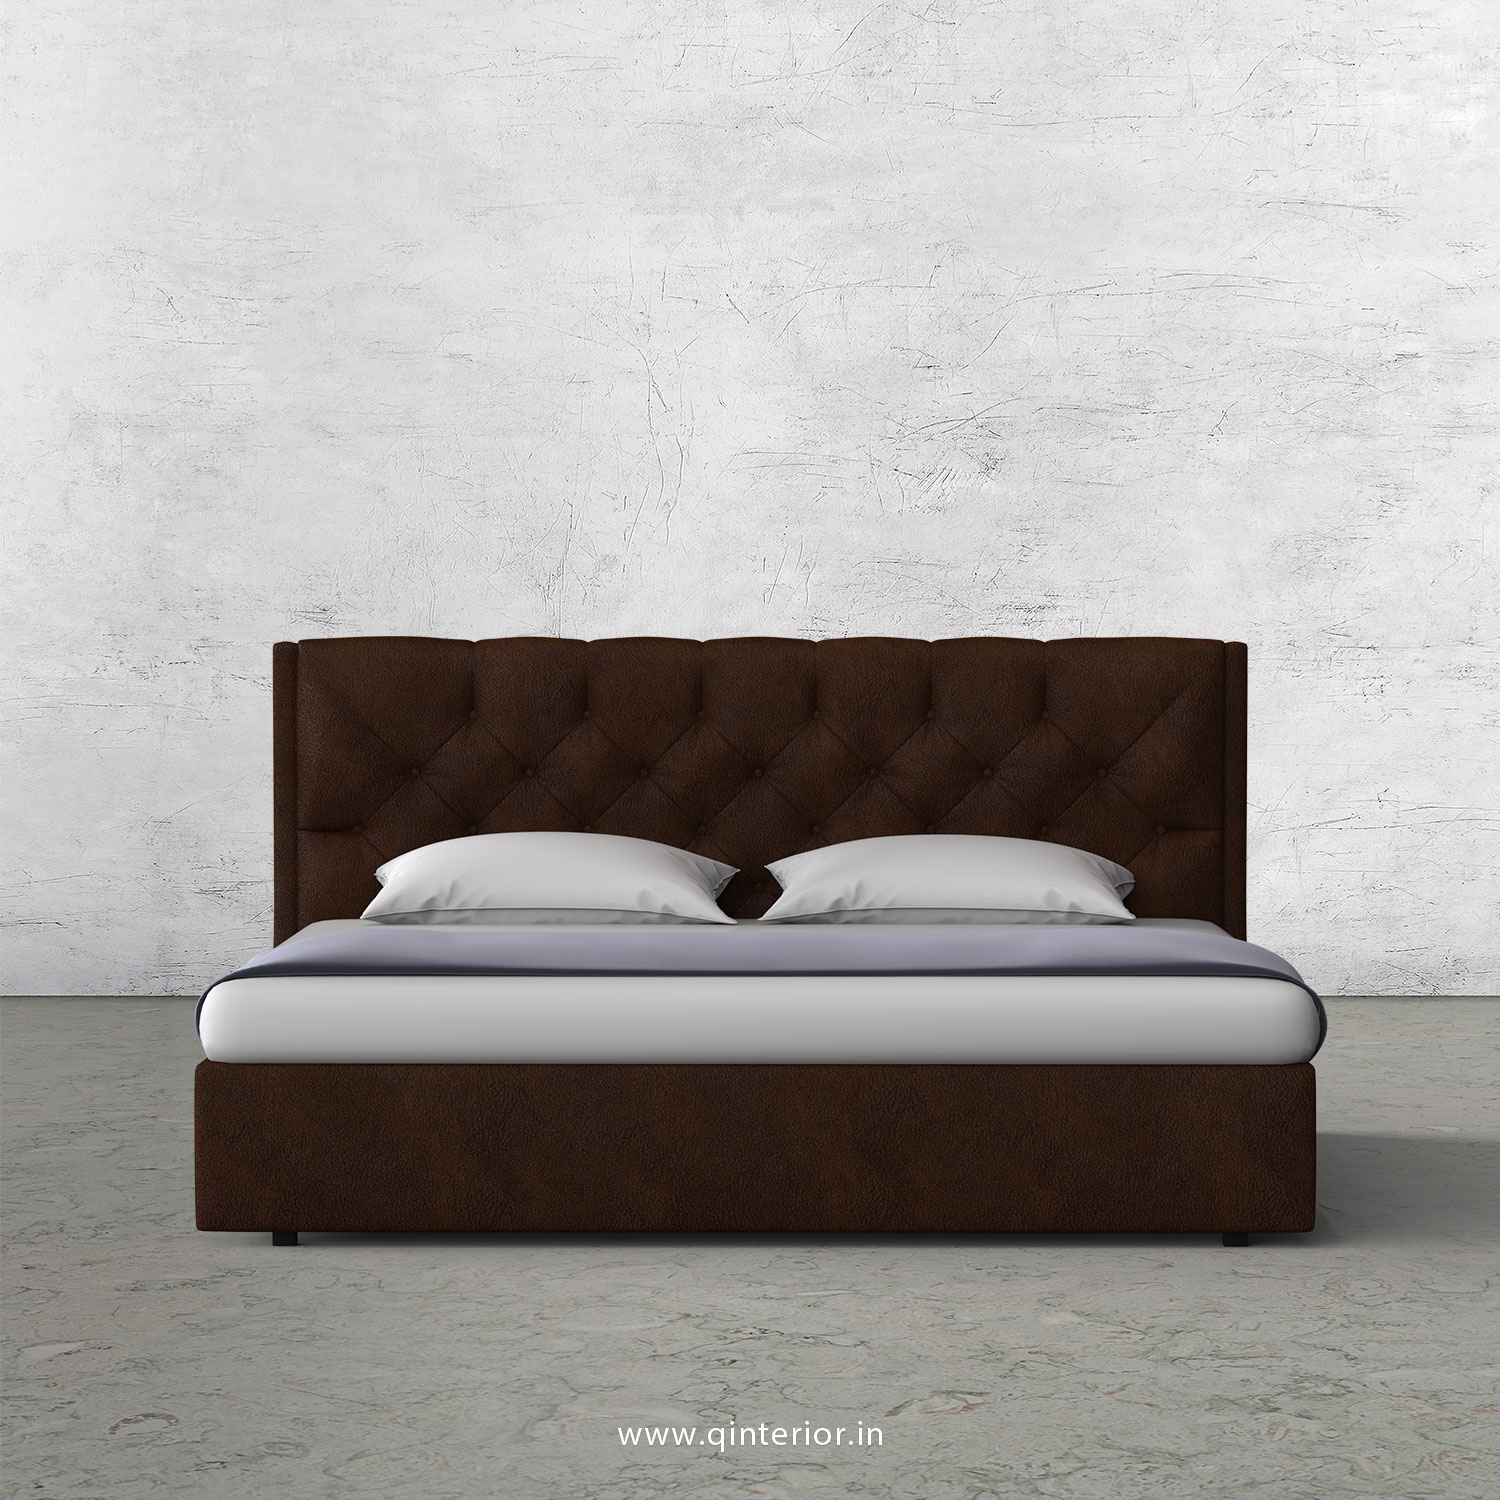 Scorpius Queen Bed in Fab Leather Fabric - QBD009 FL09